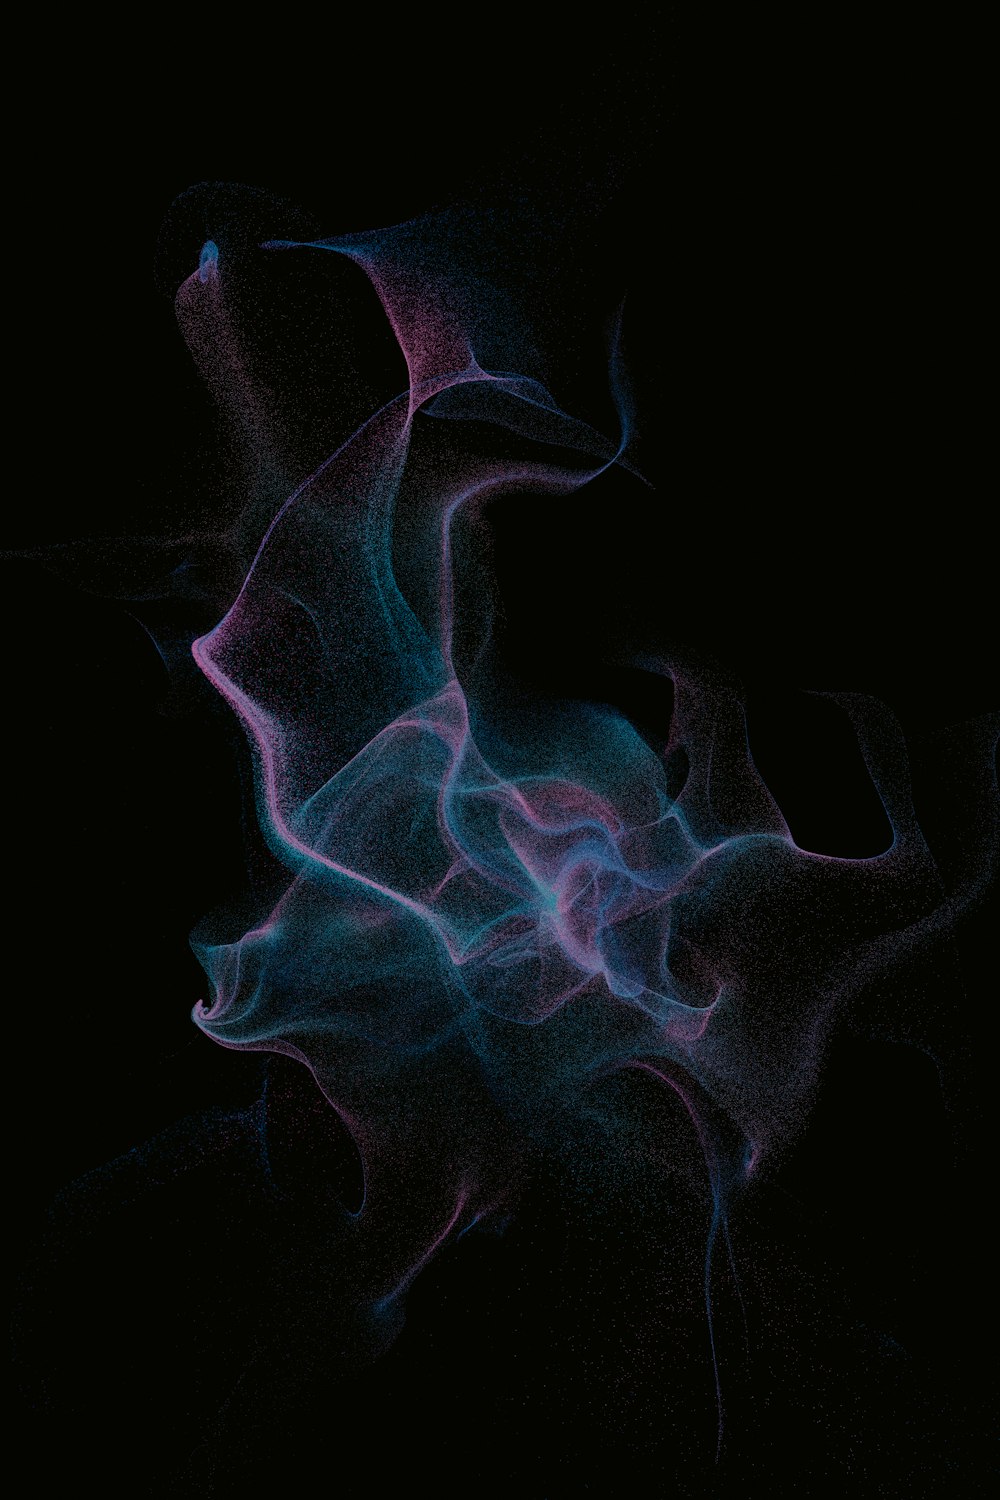 a black background with blue and pink smoke